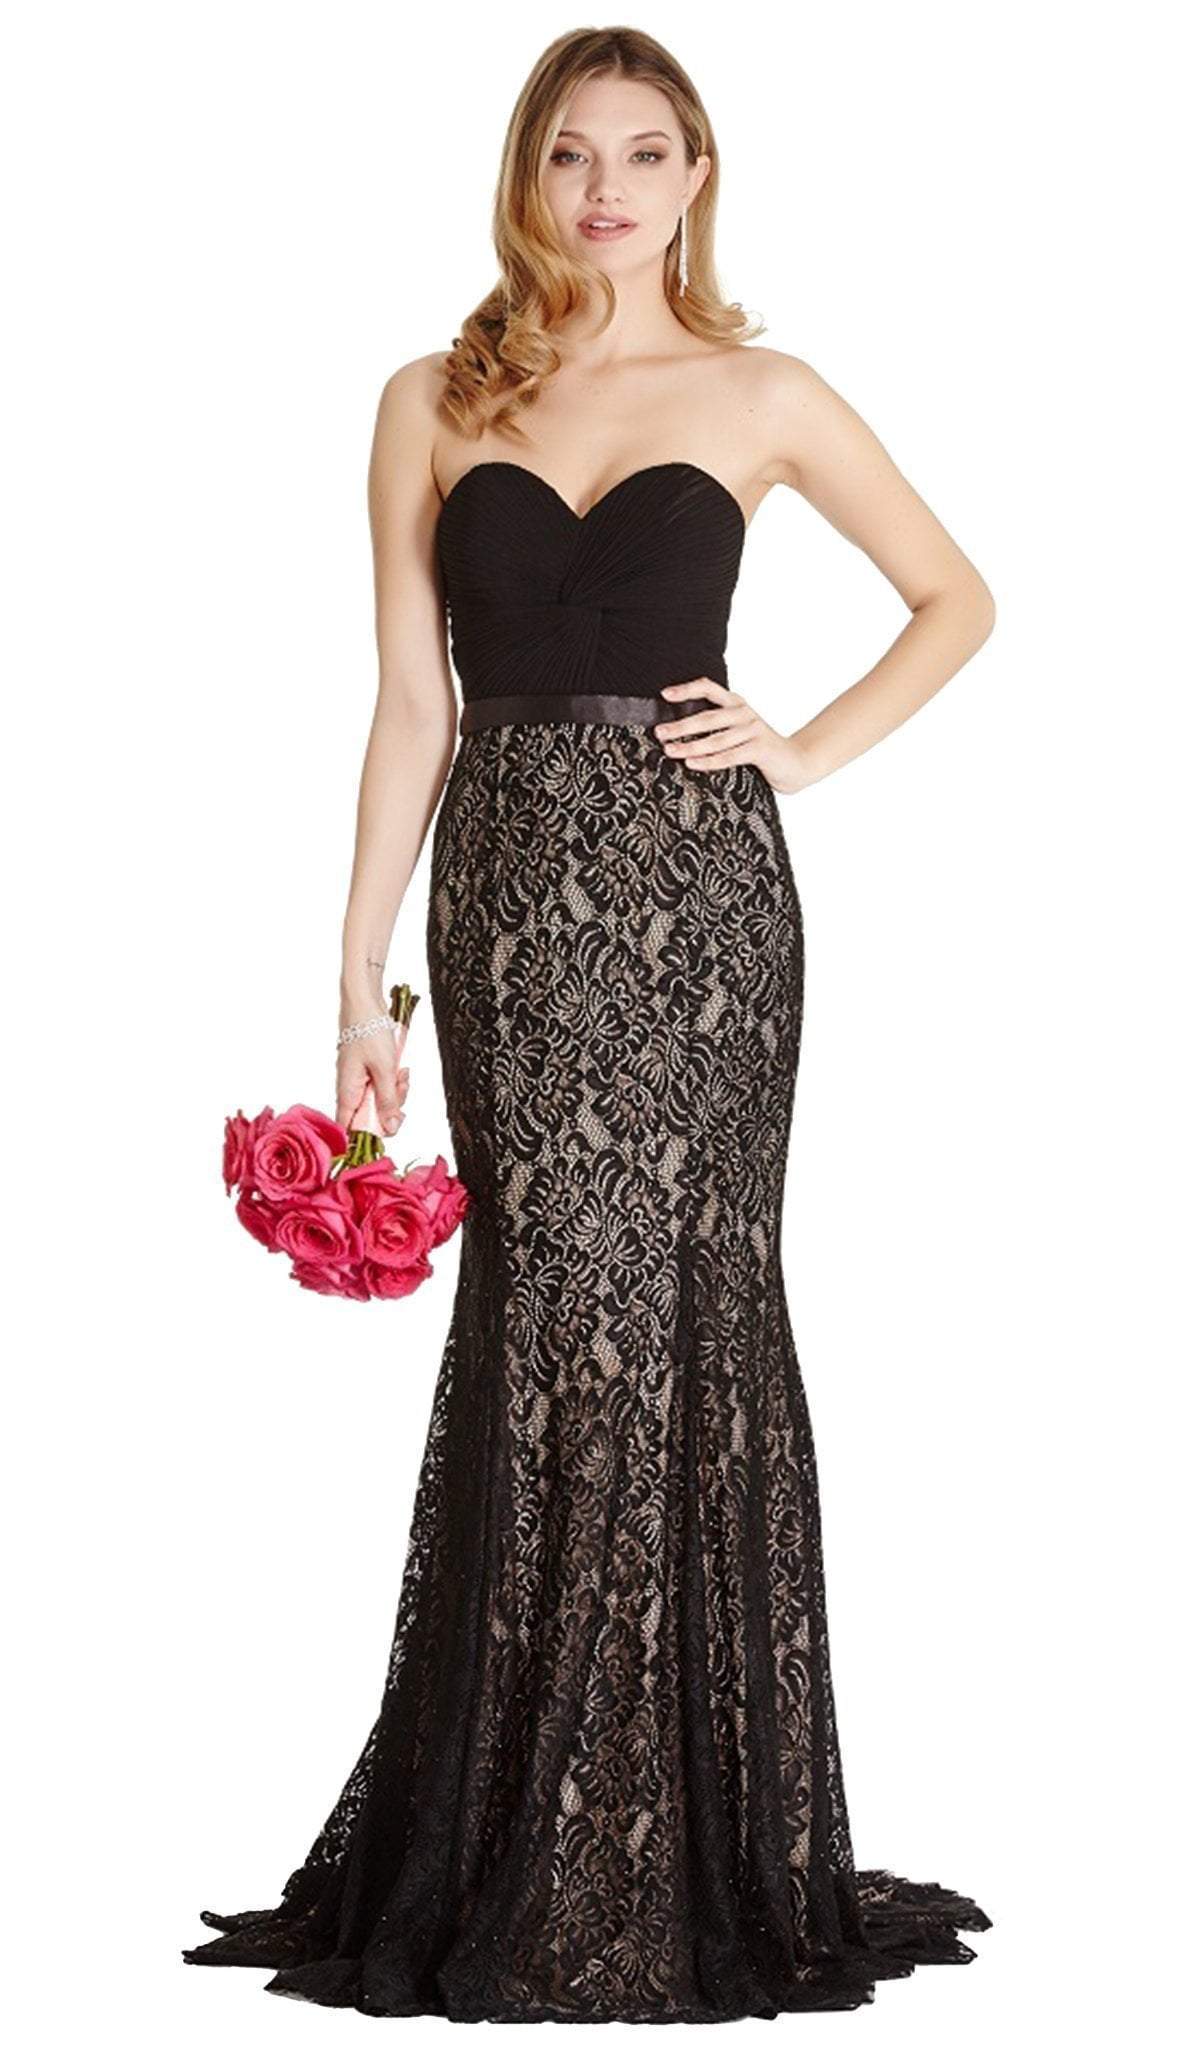 Strapless Ruched Sweetheart Lace Evening Dress Dress XXS / Black-Nude